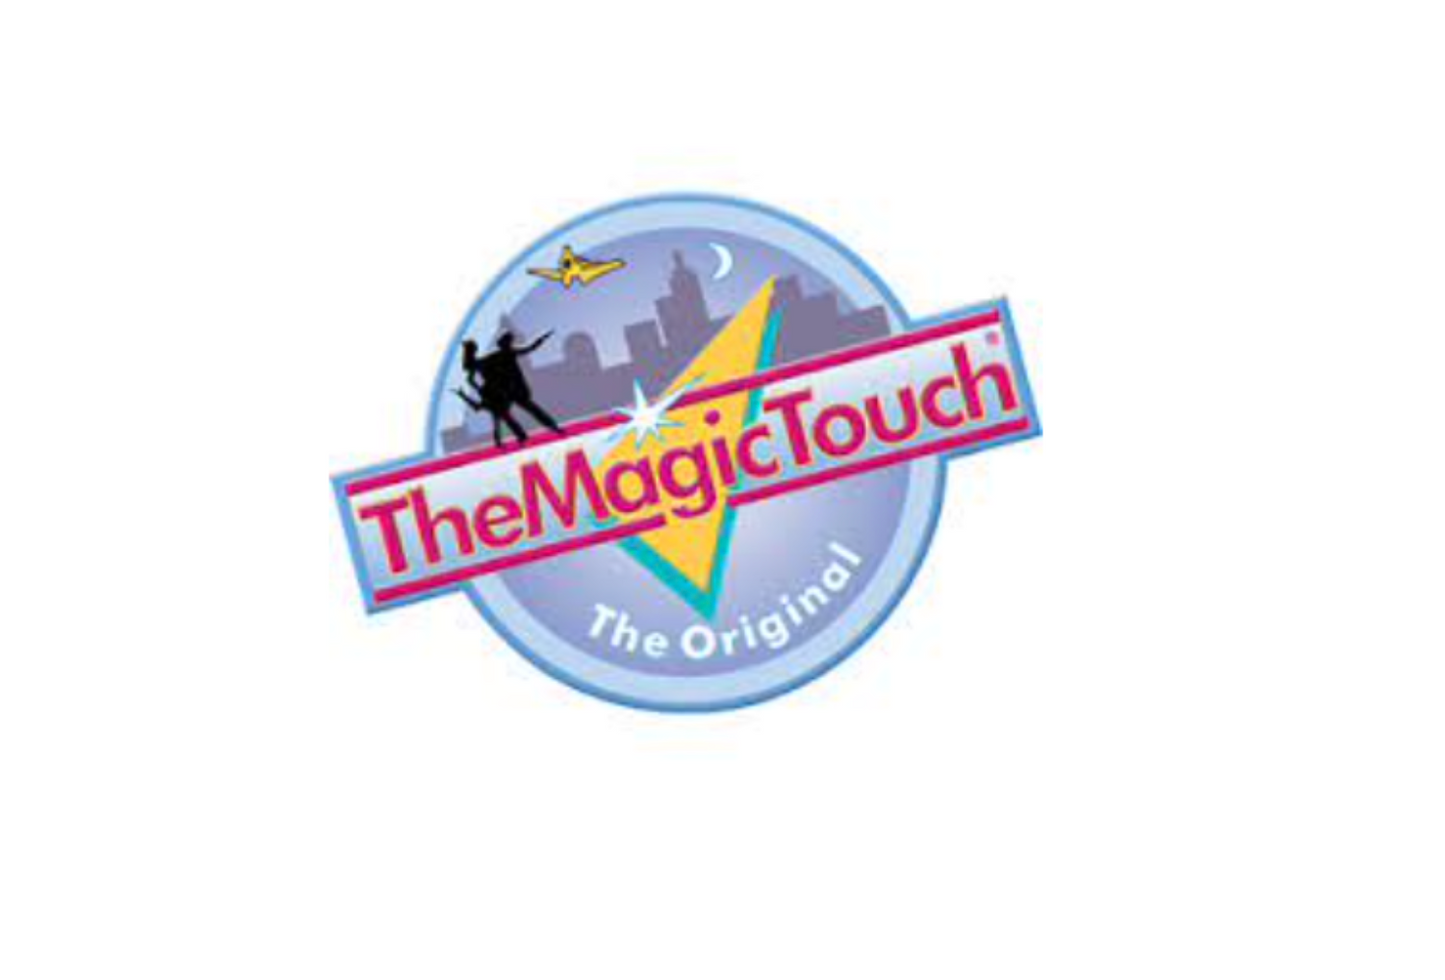 The Magic Touch RST 9.1 A3 Box of 50 Sheets | The Magic Touch